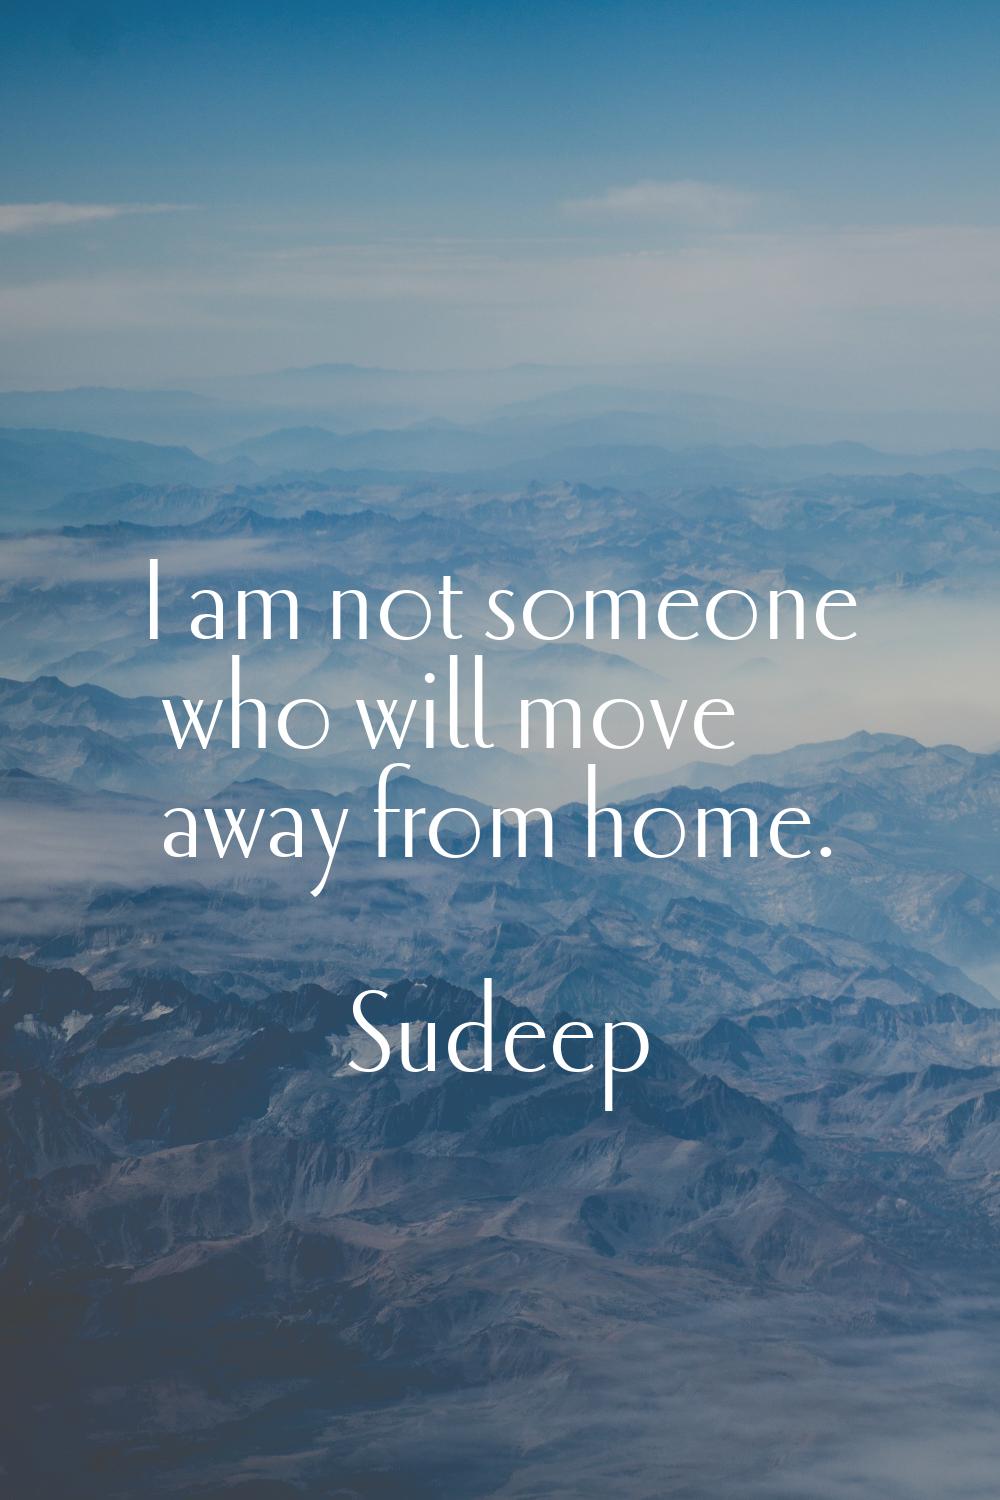 I am not someone who will move away from home.